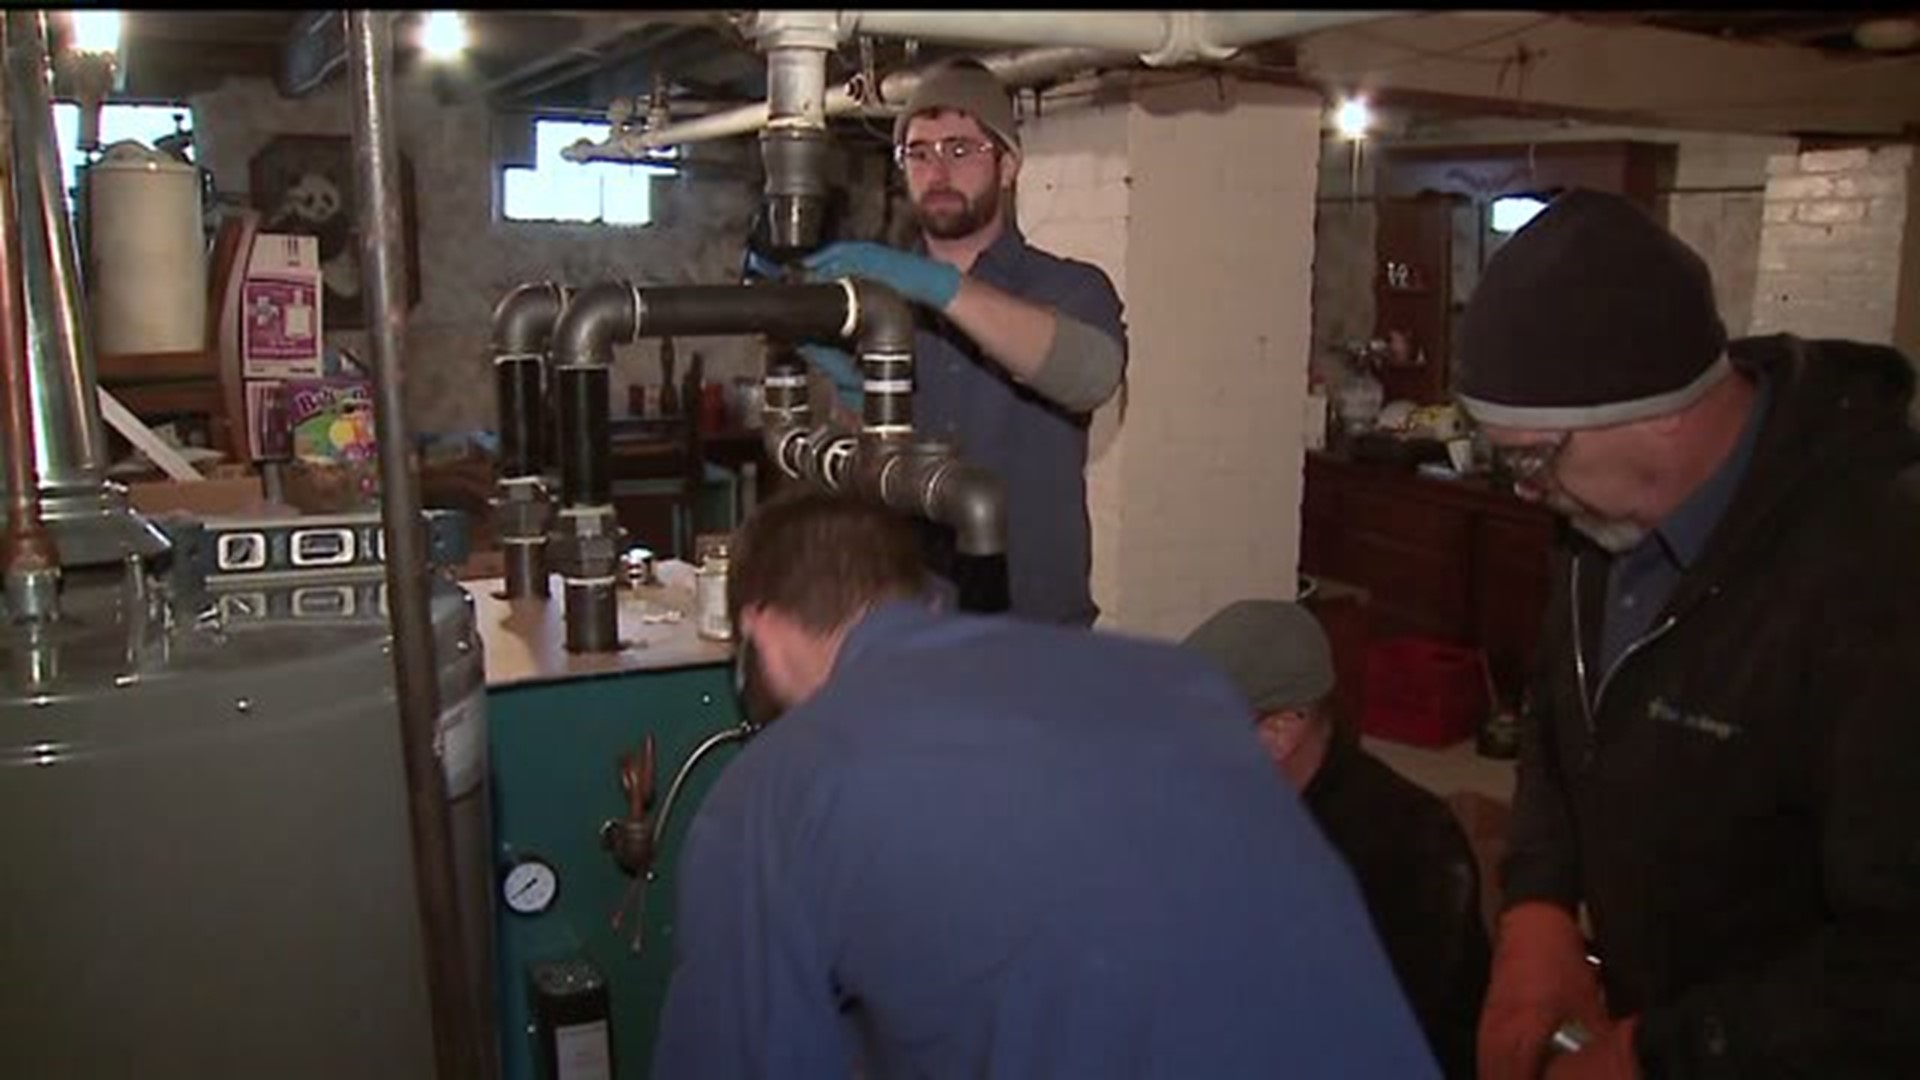 Woman receives free heating system